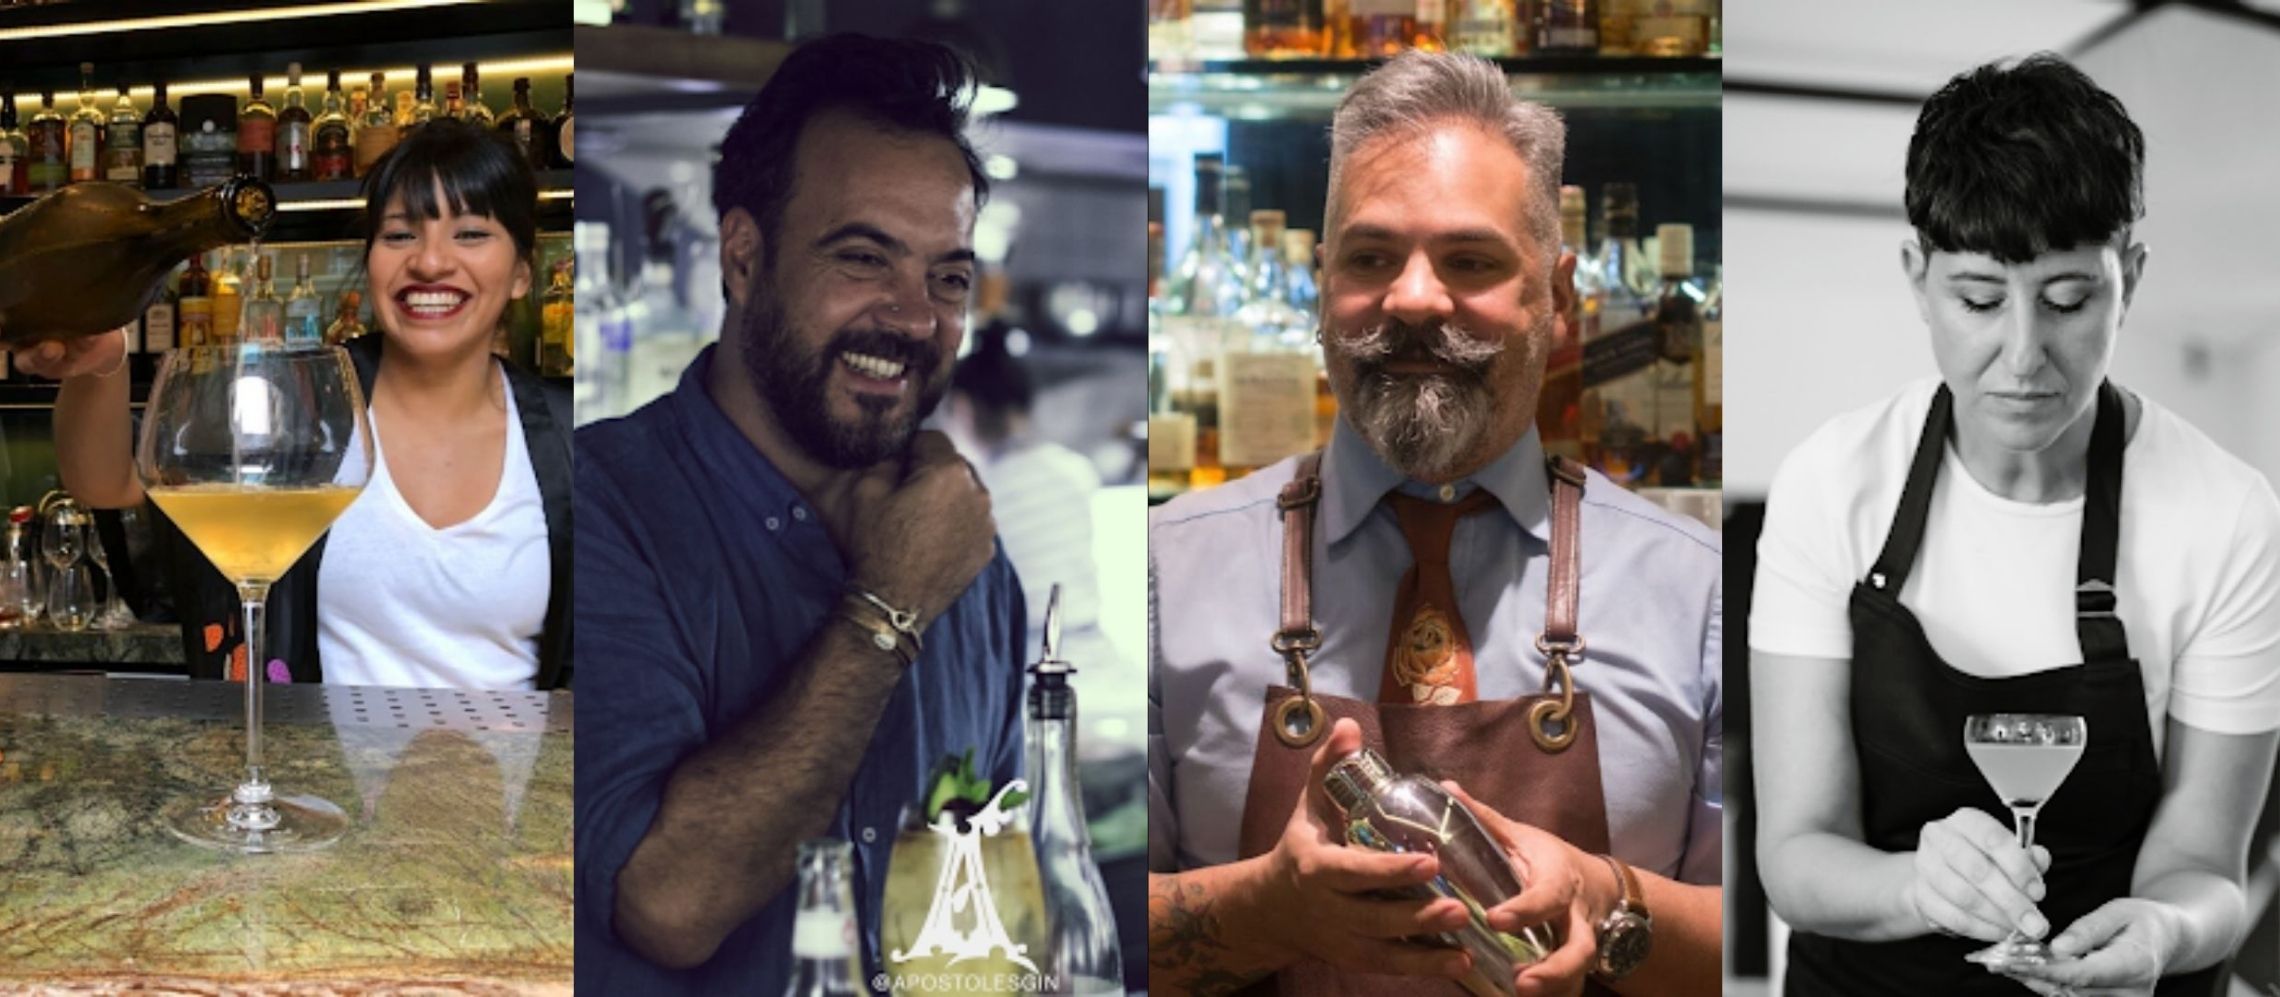 Photo for: Top 10 bartenders of Buenos Aires